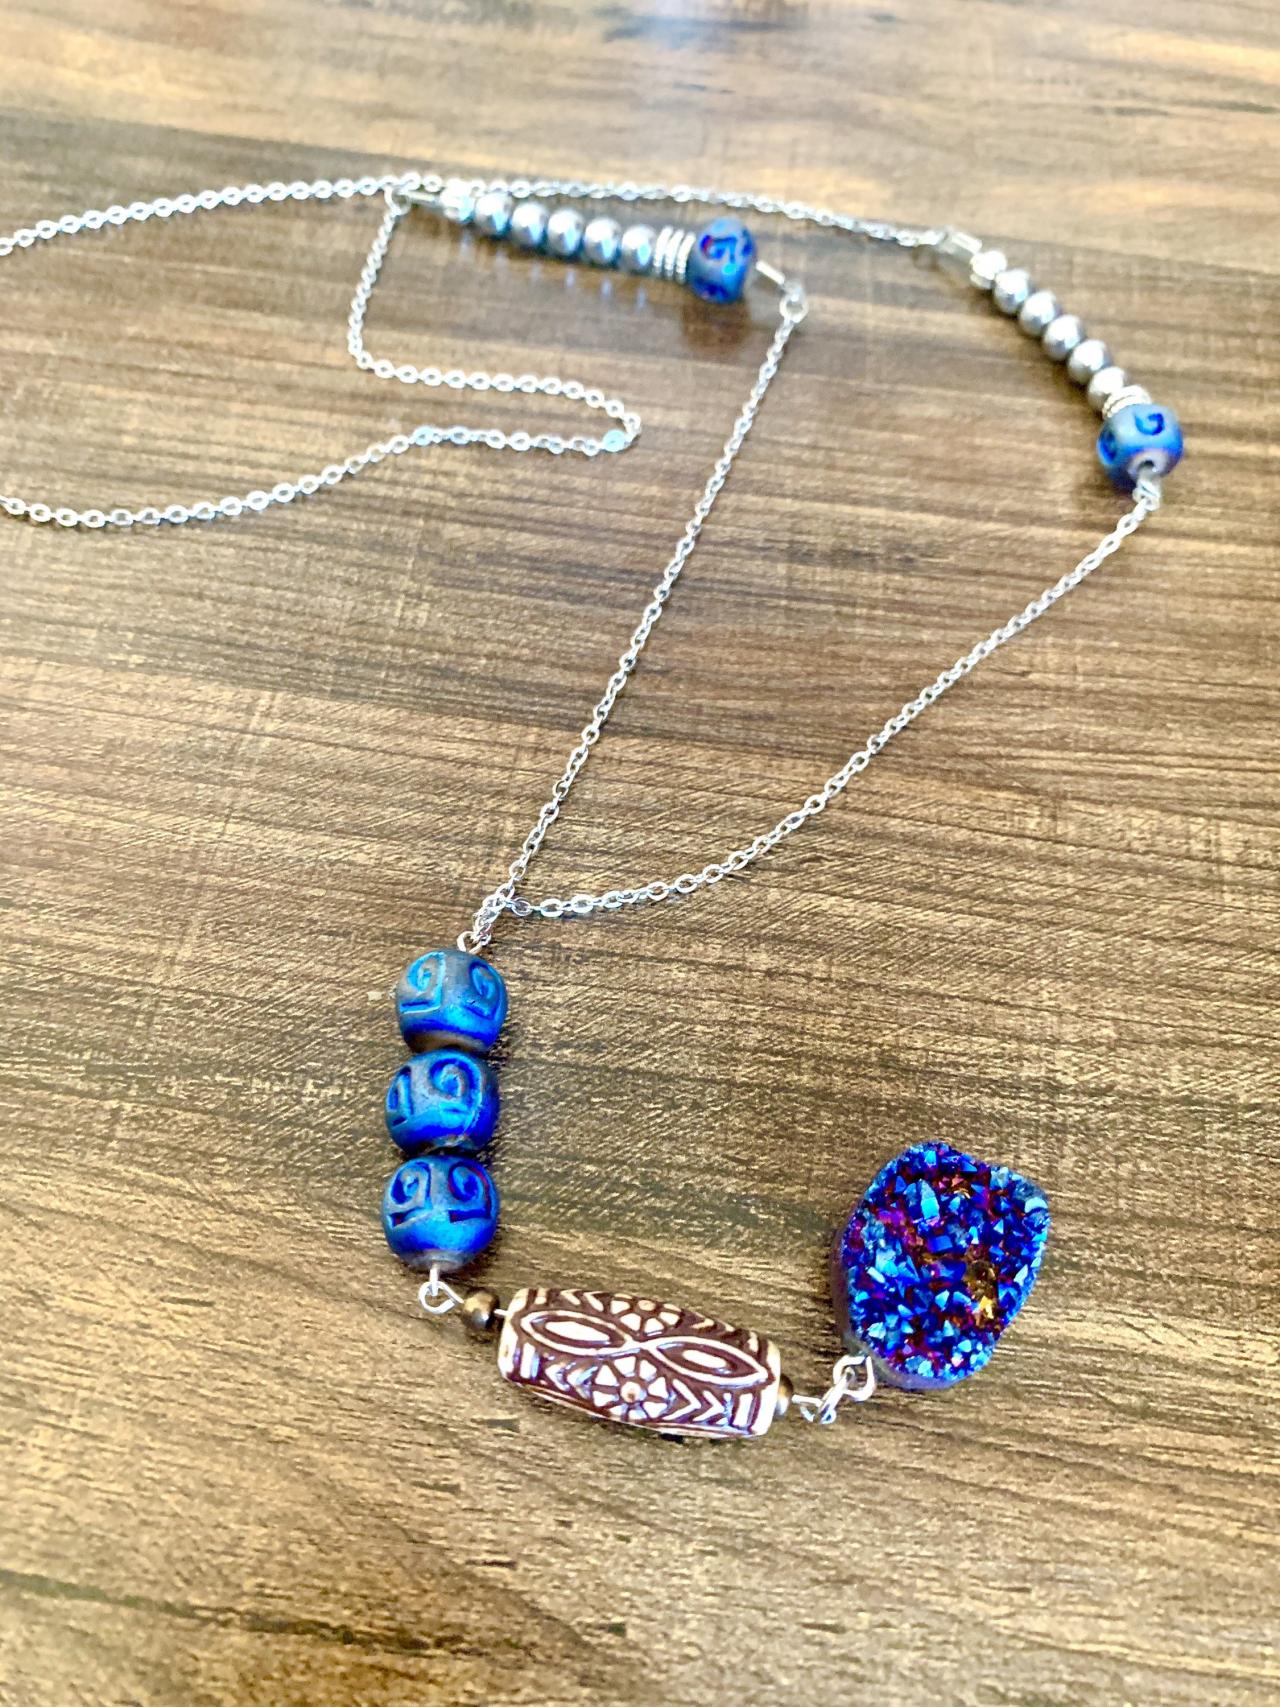 Titanium Quartz And Silver Hematite Beaded Long Gemstone Necklace For Women Blue Pendant With Tribal Beads Handmade In Us